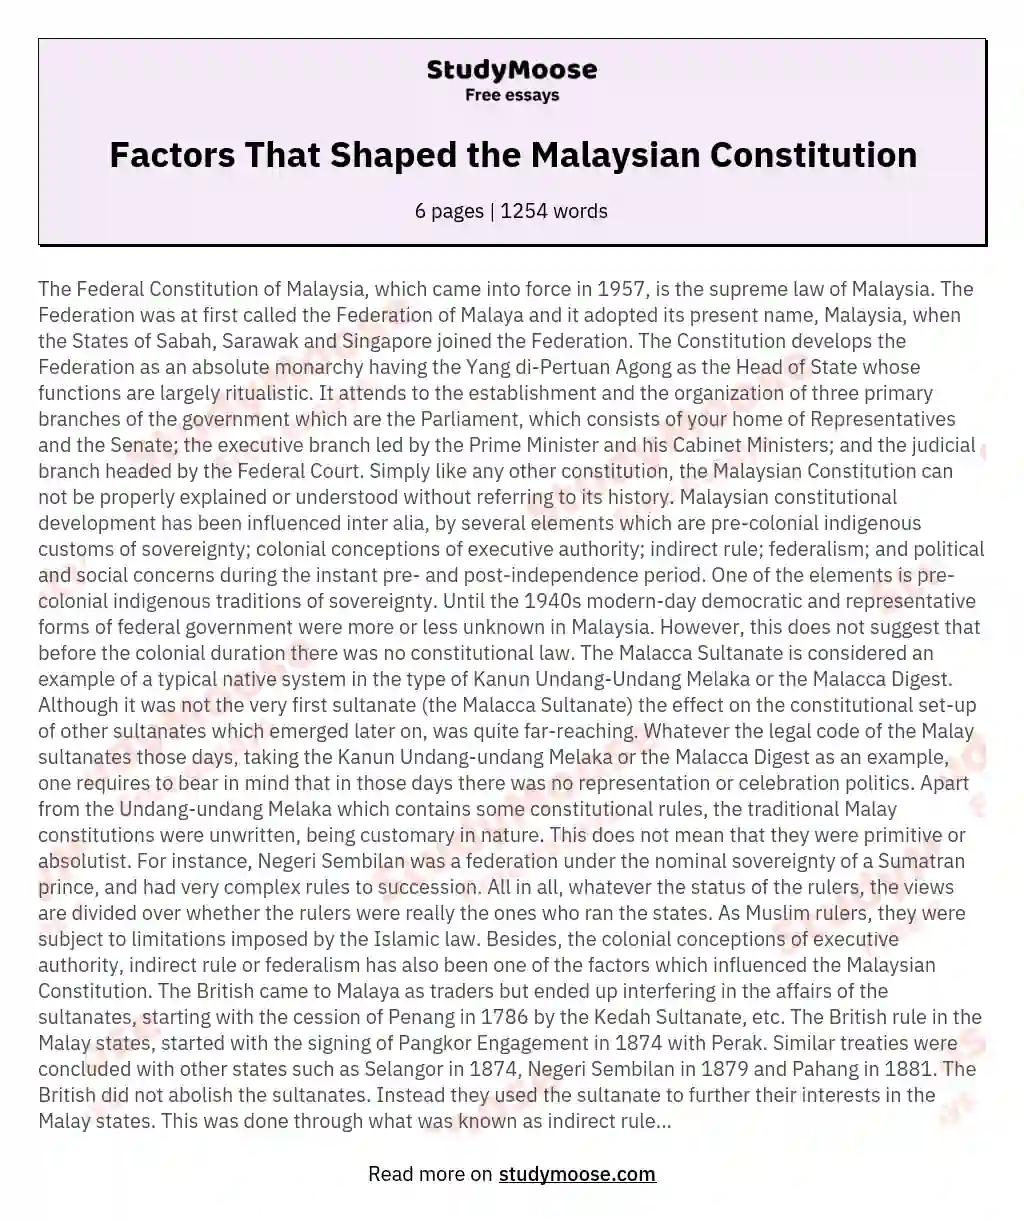 Briefly Explain the Historical Factors That Have Influenced the Malaysian Constitution